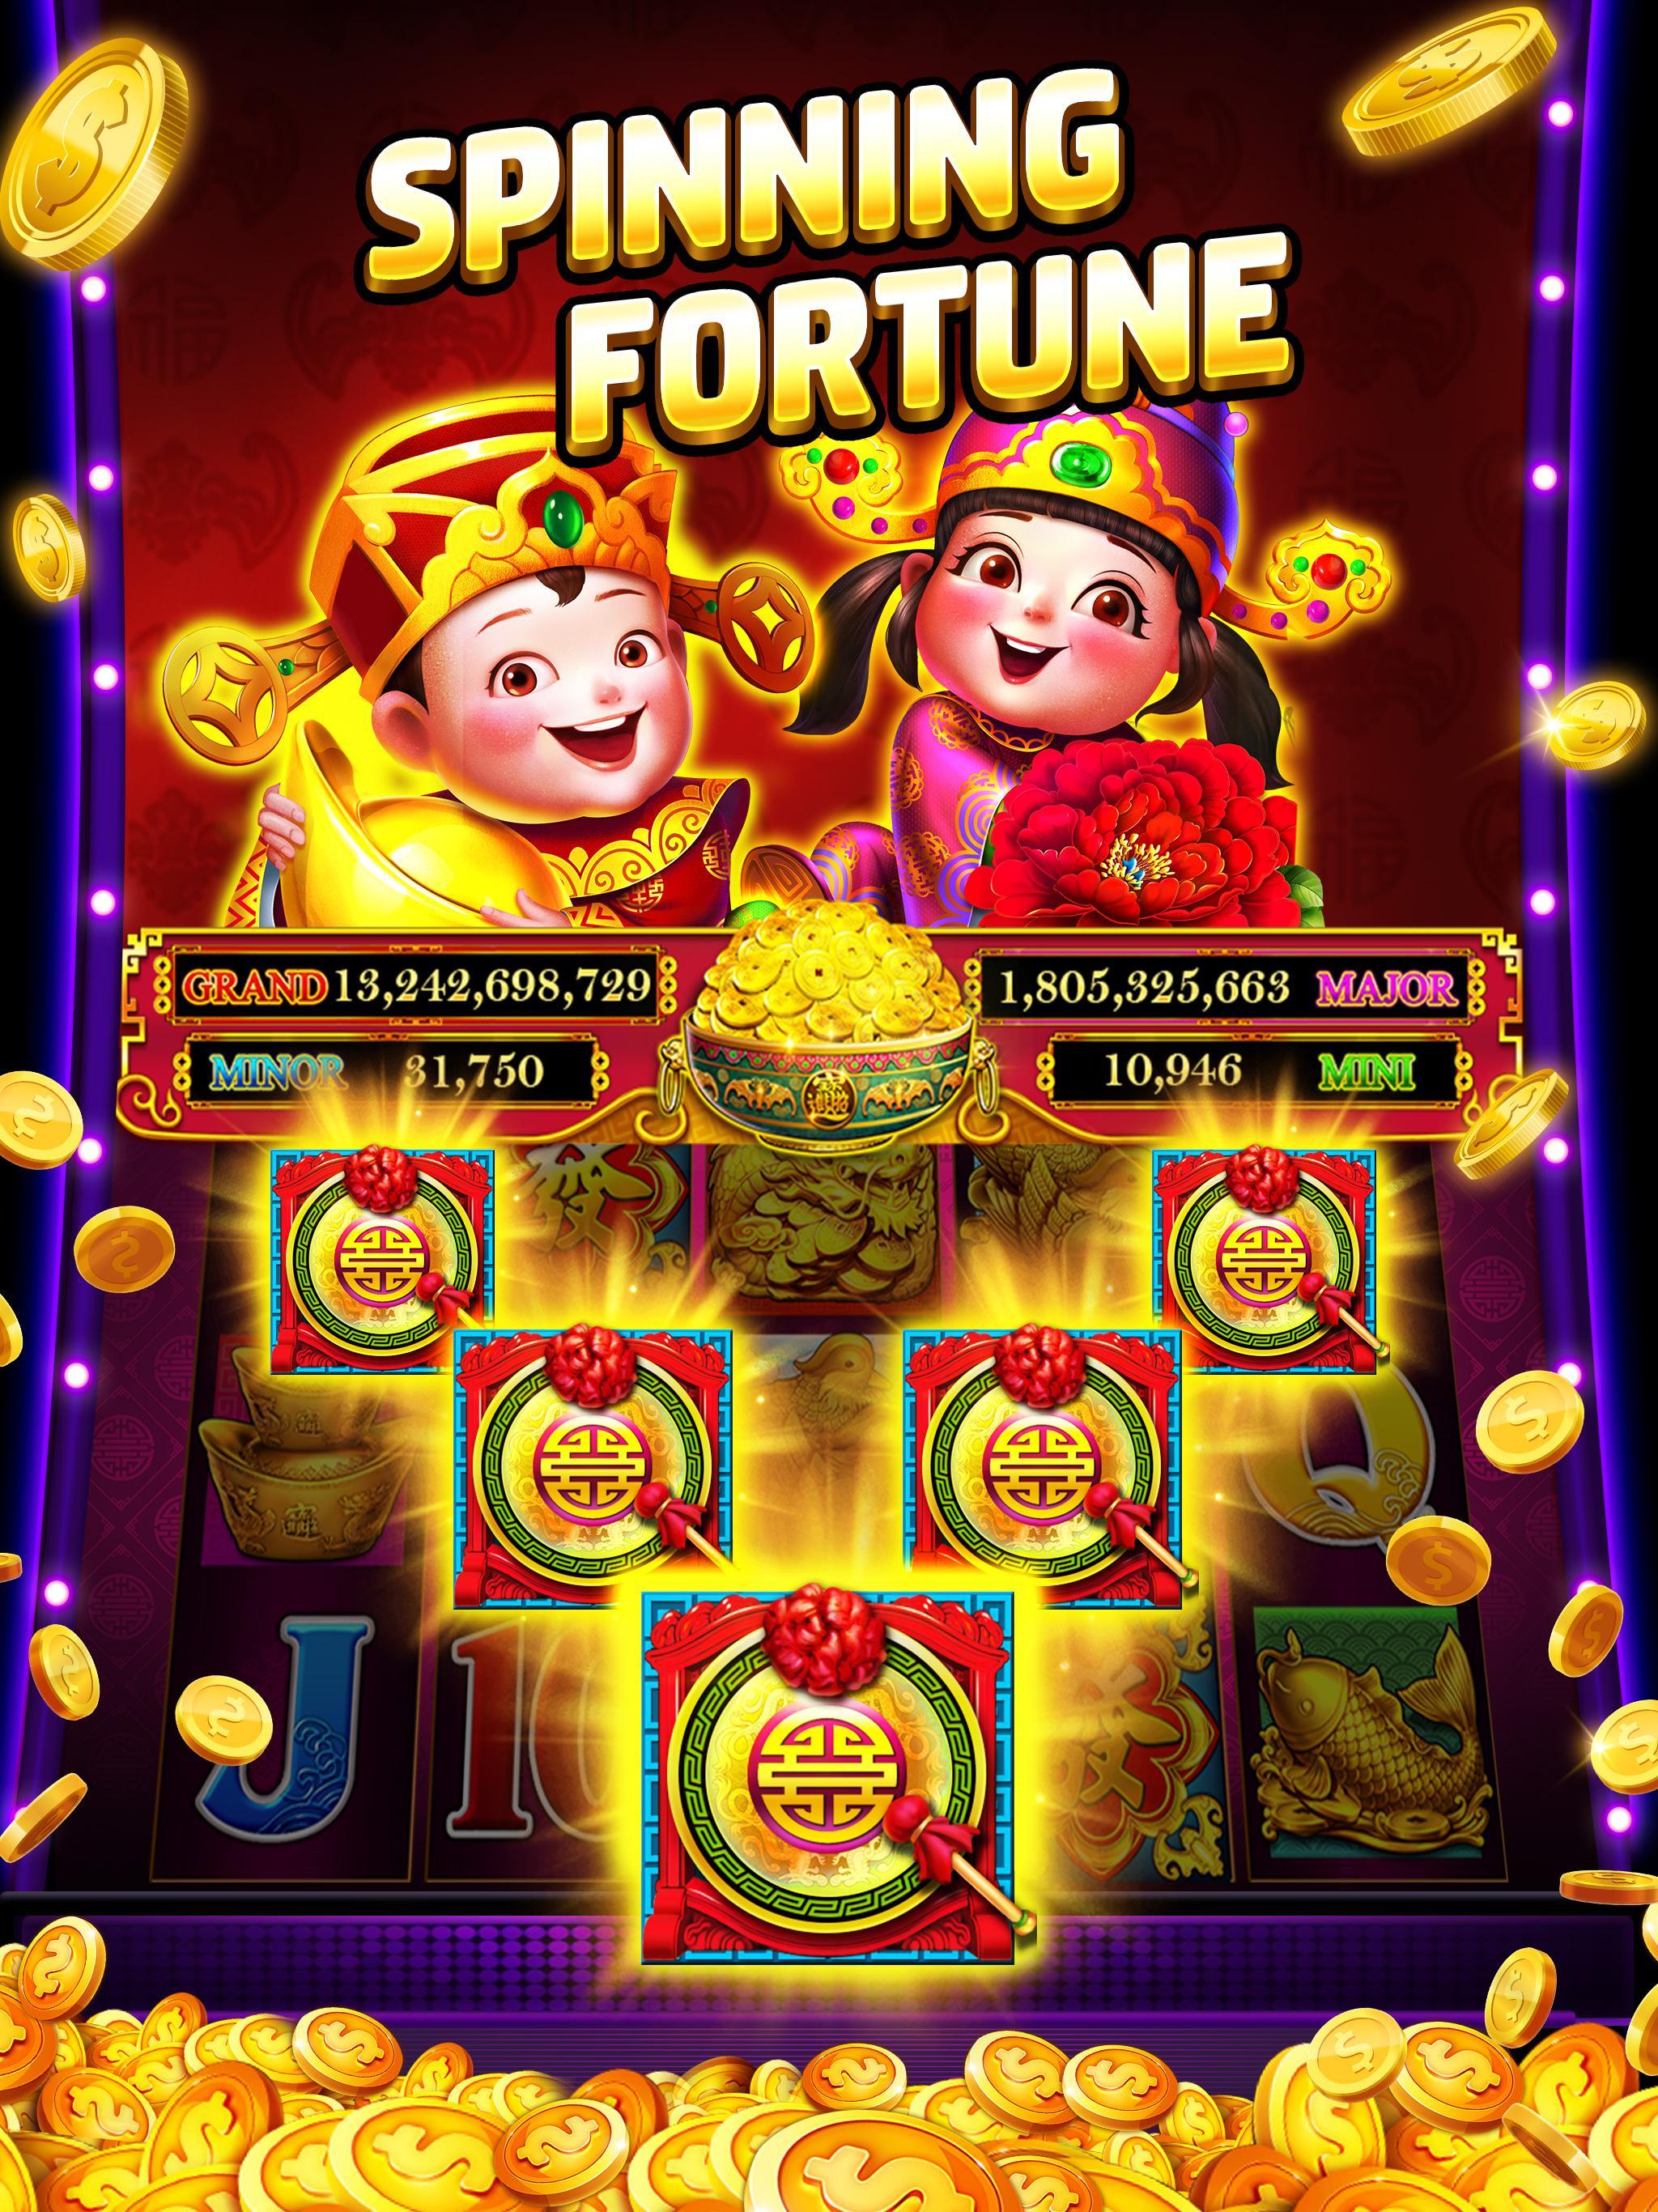 free coins for jackpot mania